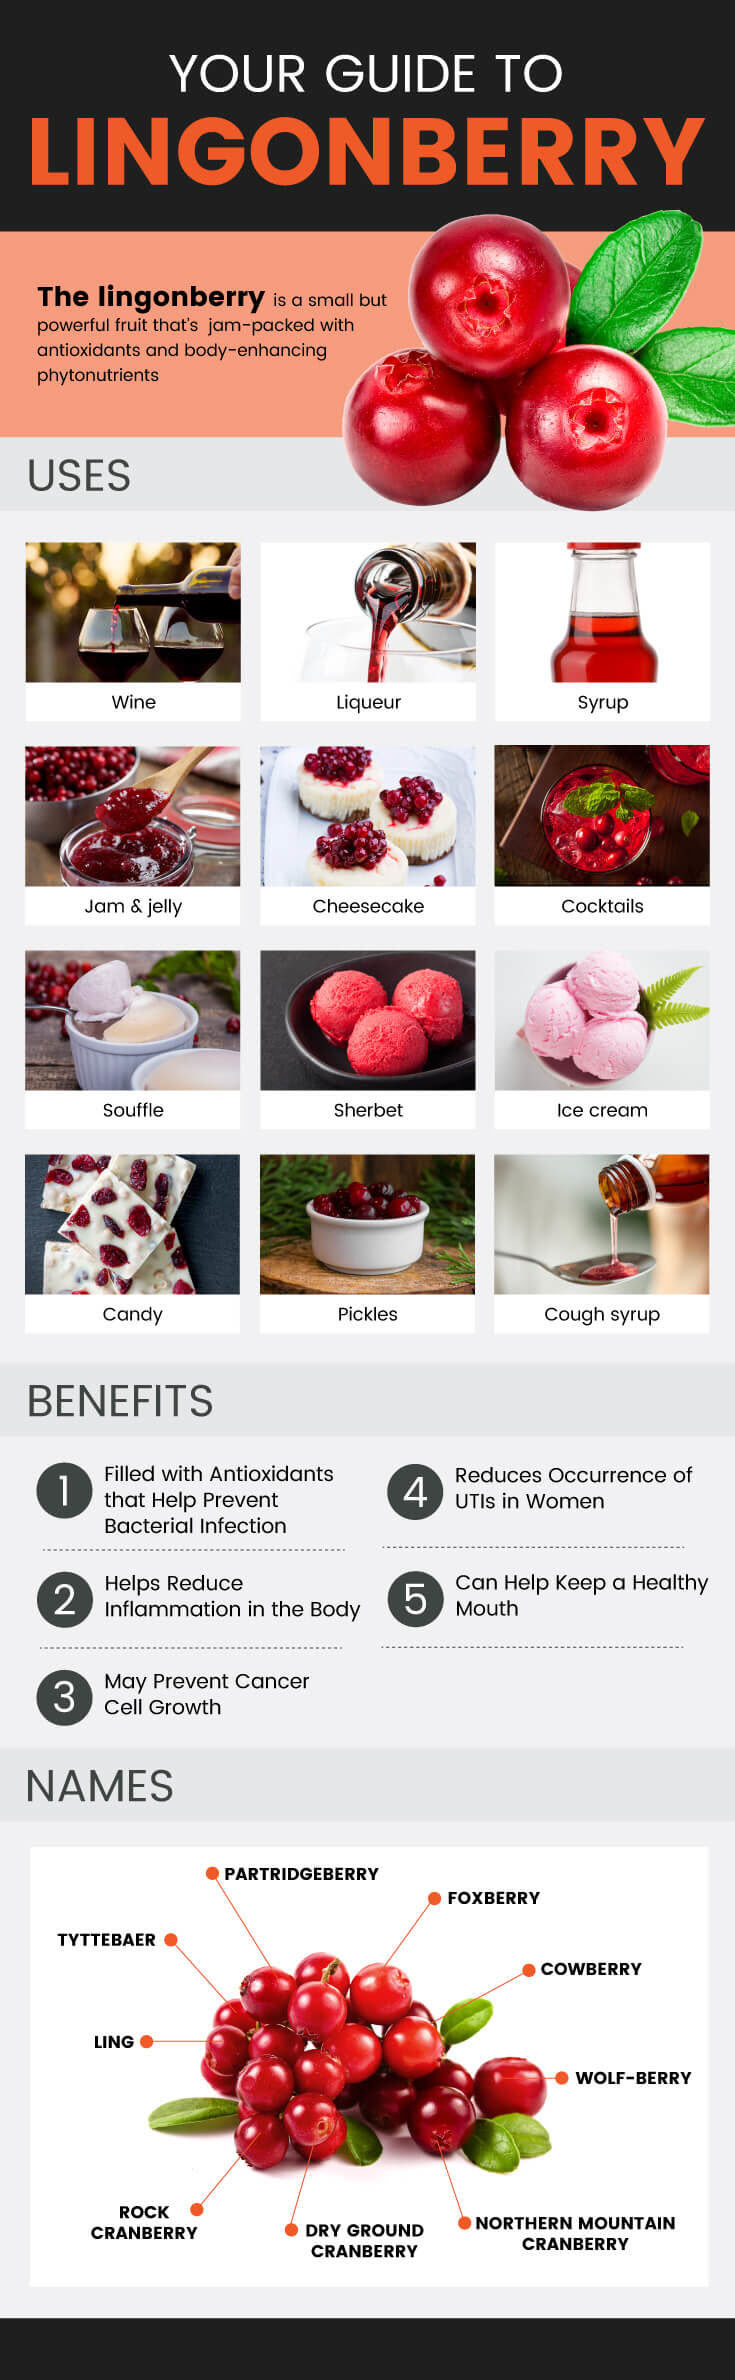 Lingonberry guide - MKexpress.net